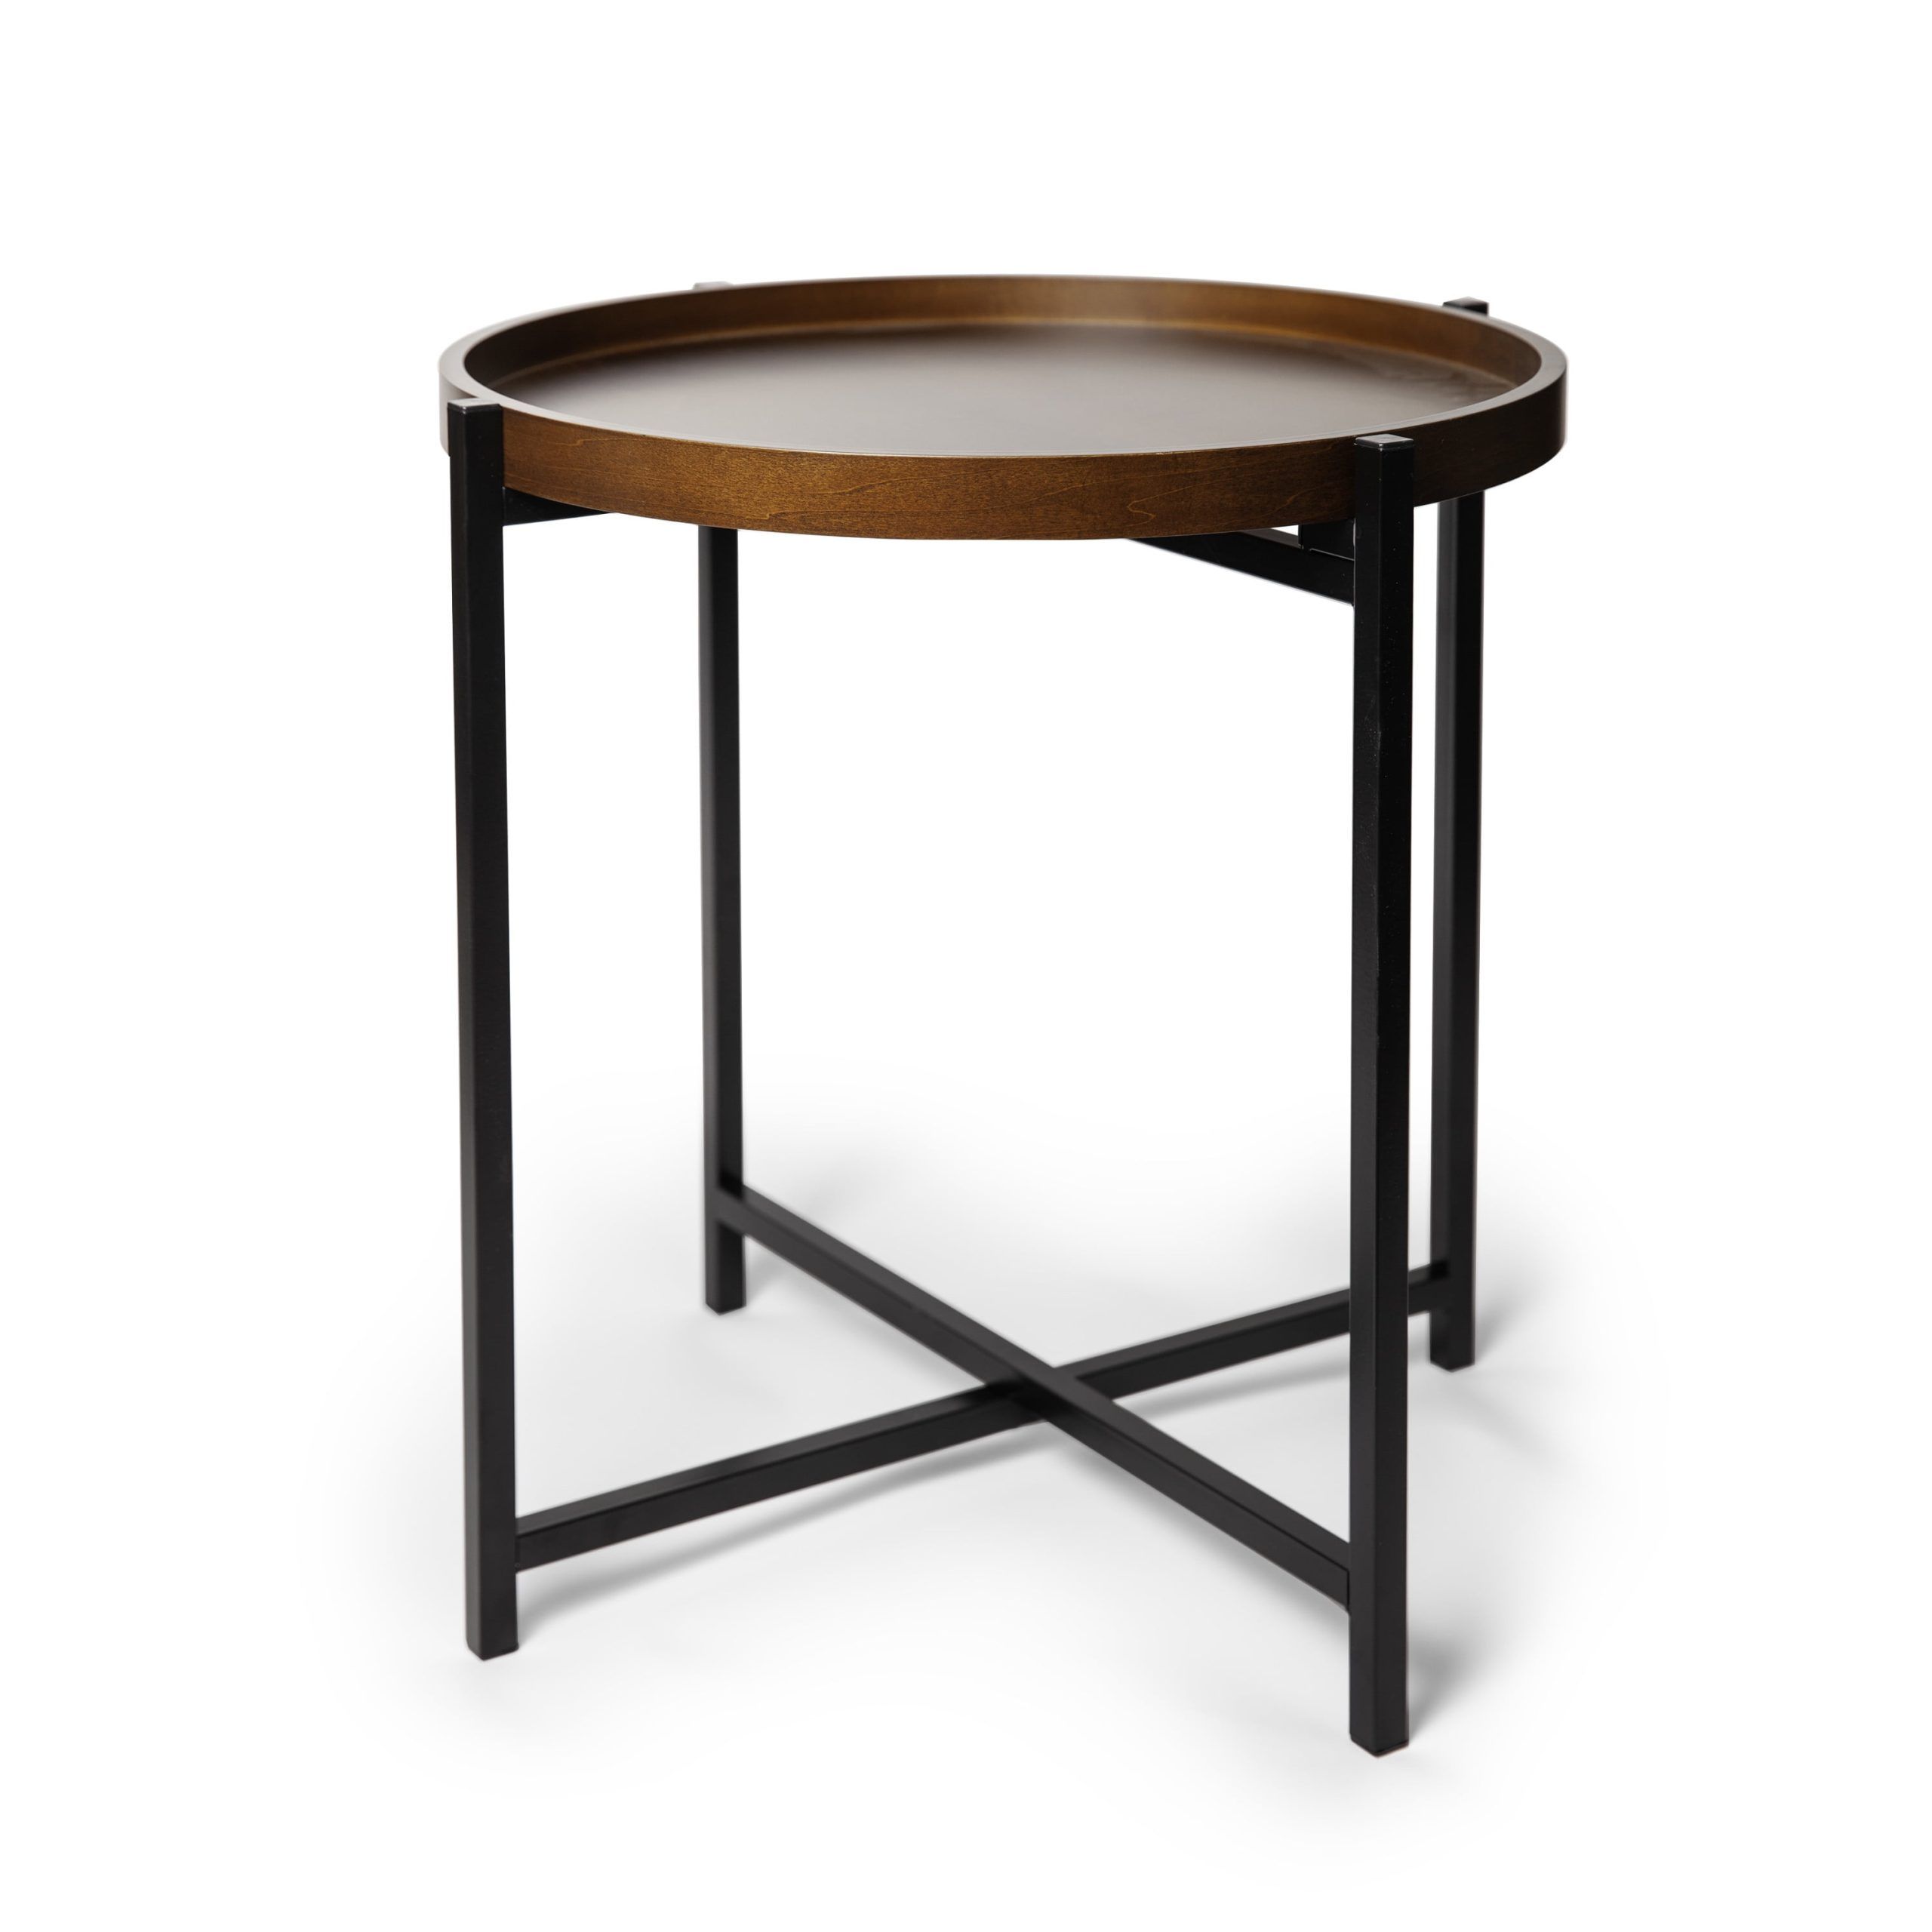 Mid Century Modern Round Side Table With Removable Wood Tray – Walmart With Regard To Detachable Tray Coffee Tables (View 14 of 15)